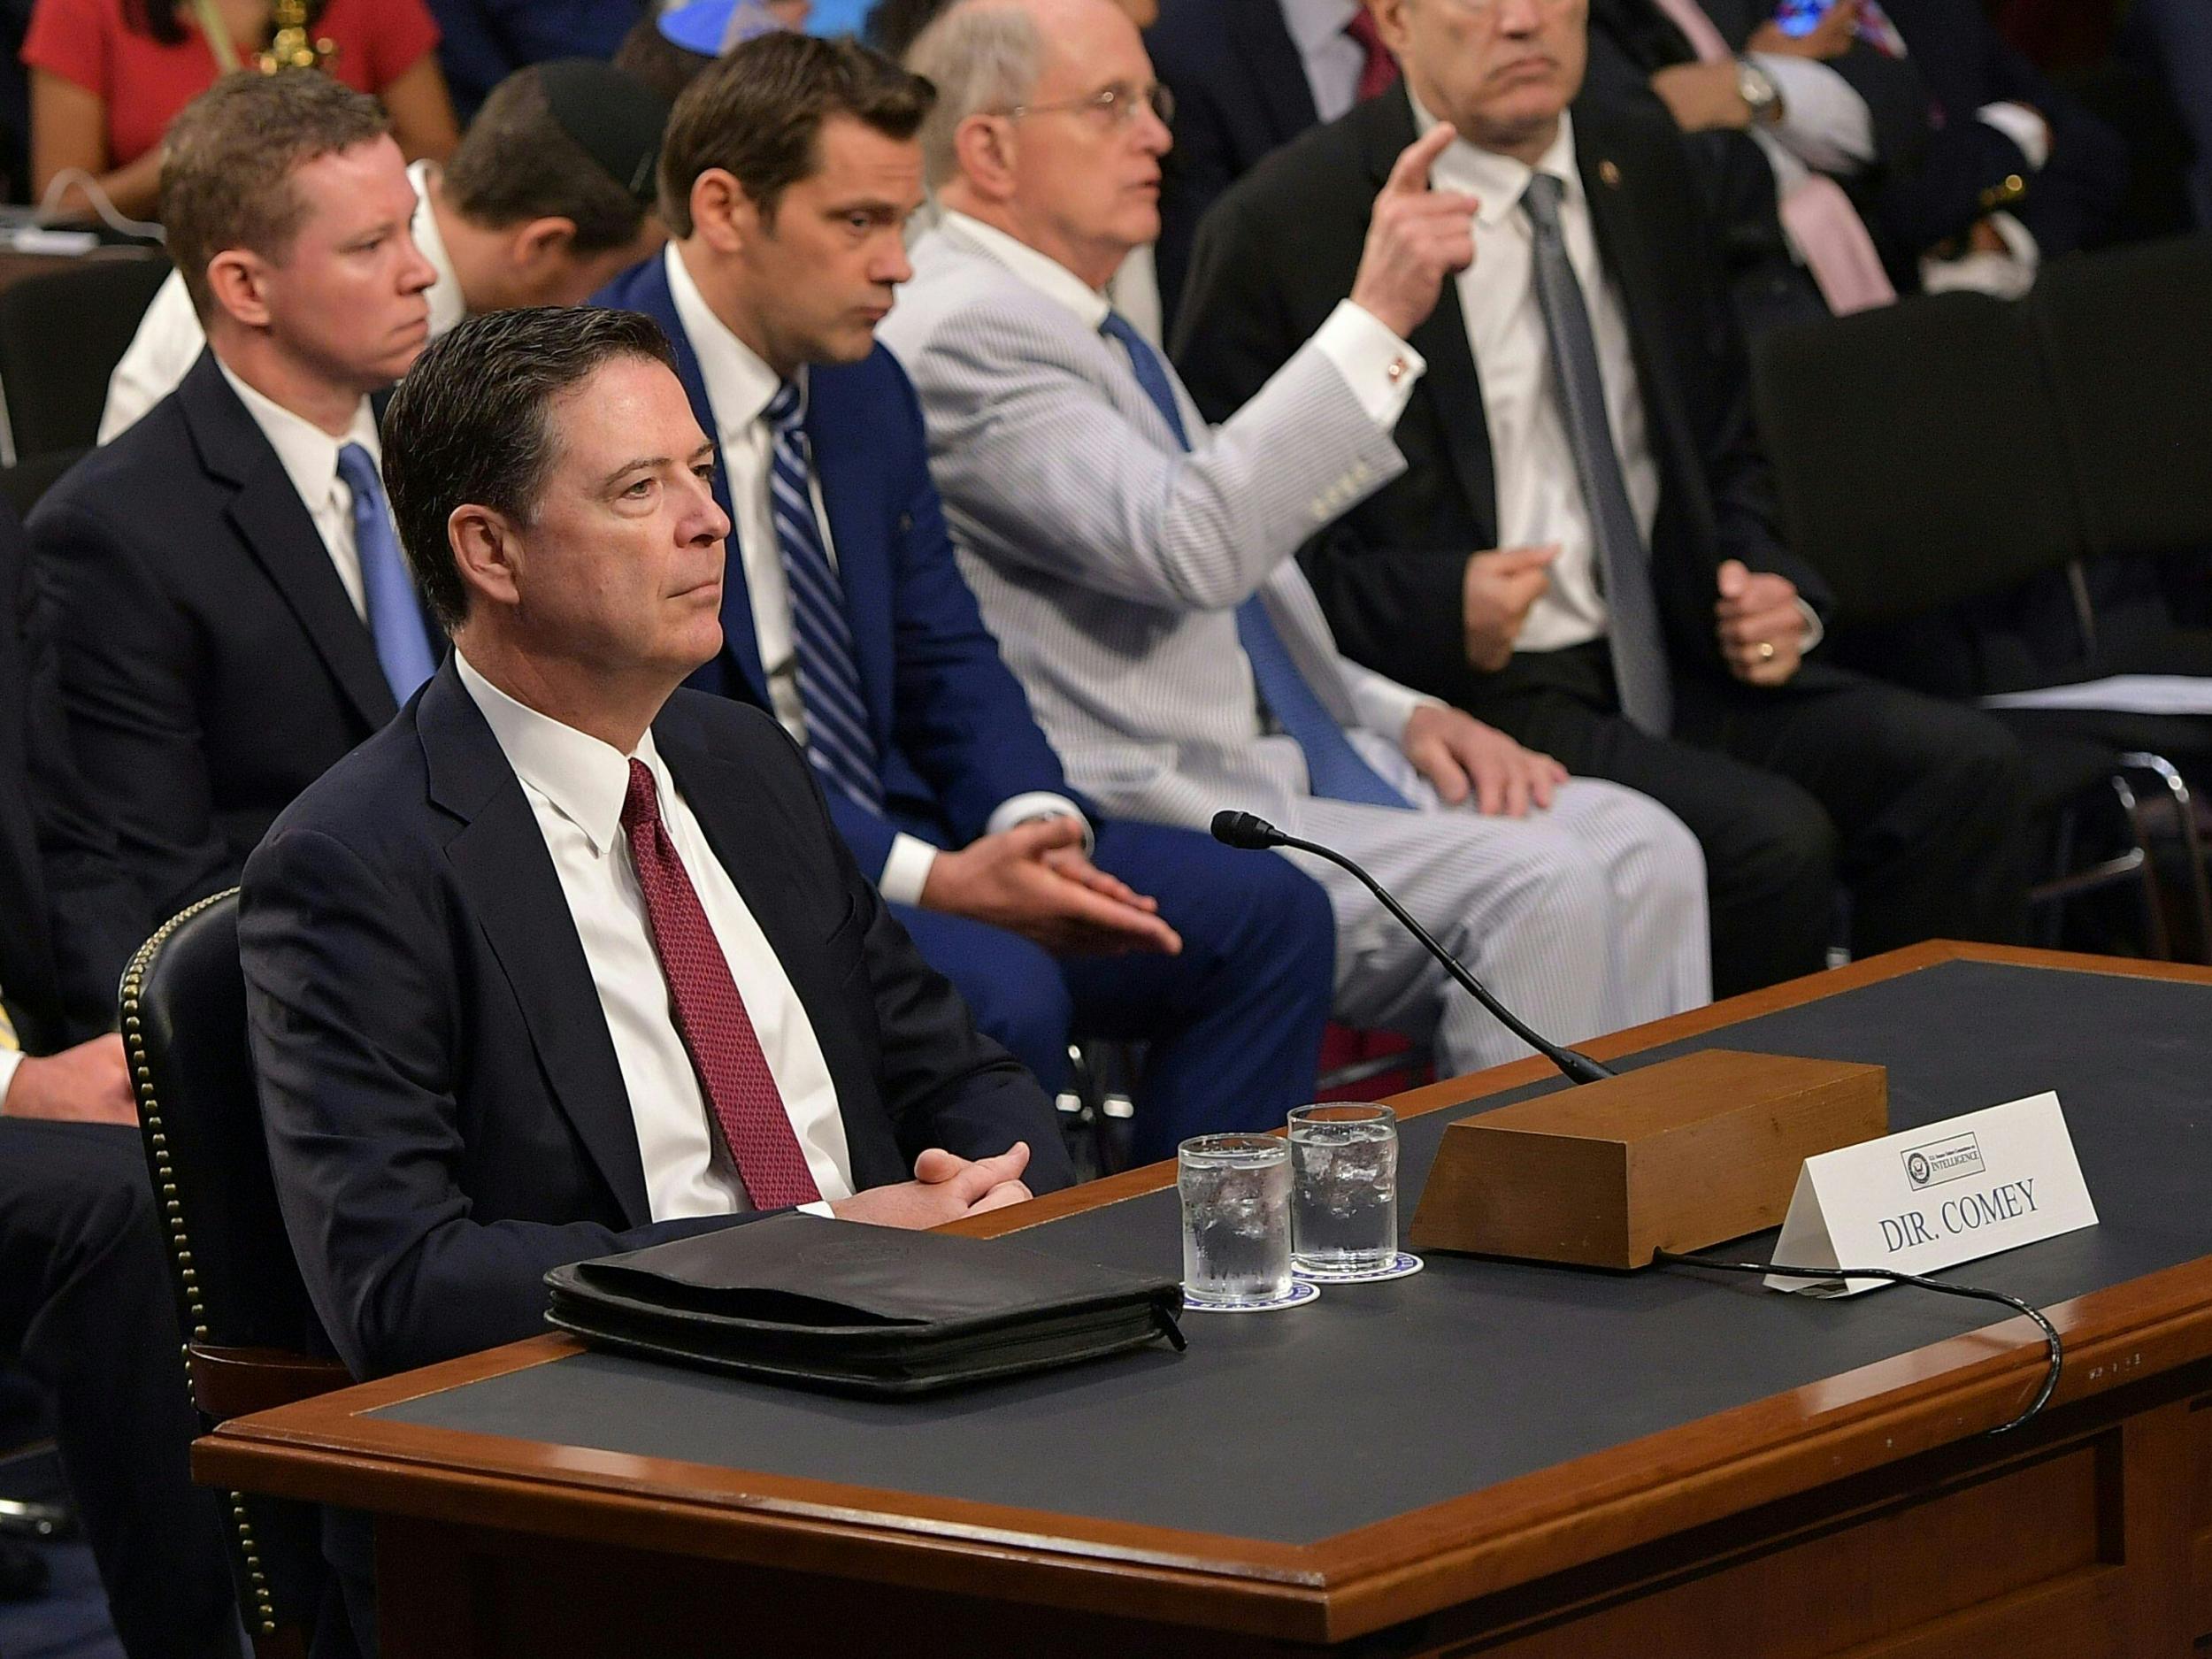 Comey's testimony has been highly anticipated in Washington